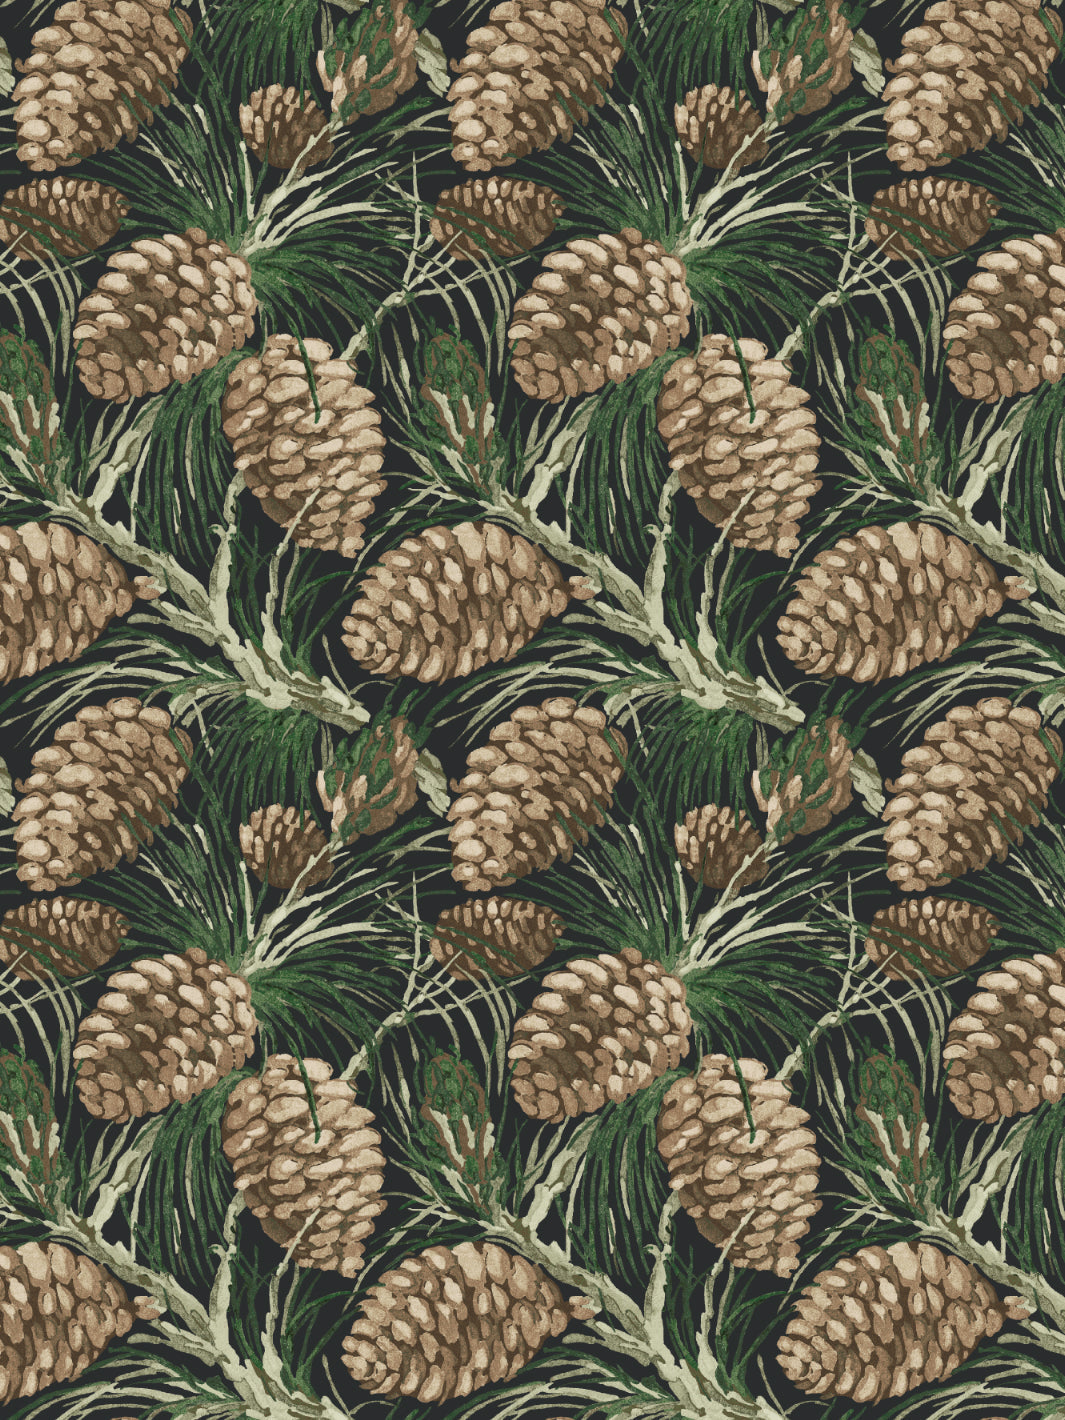 'Pinecones' Wallpaper by Nathan Turner - Charcoal